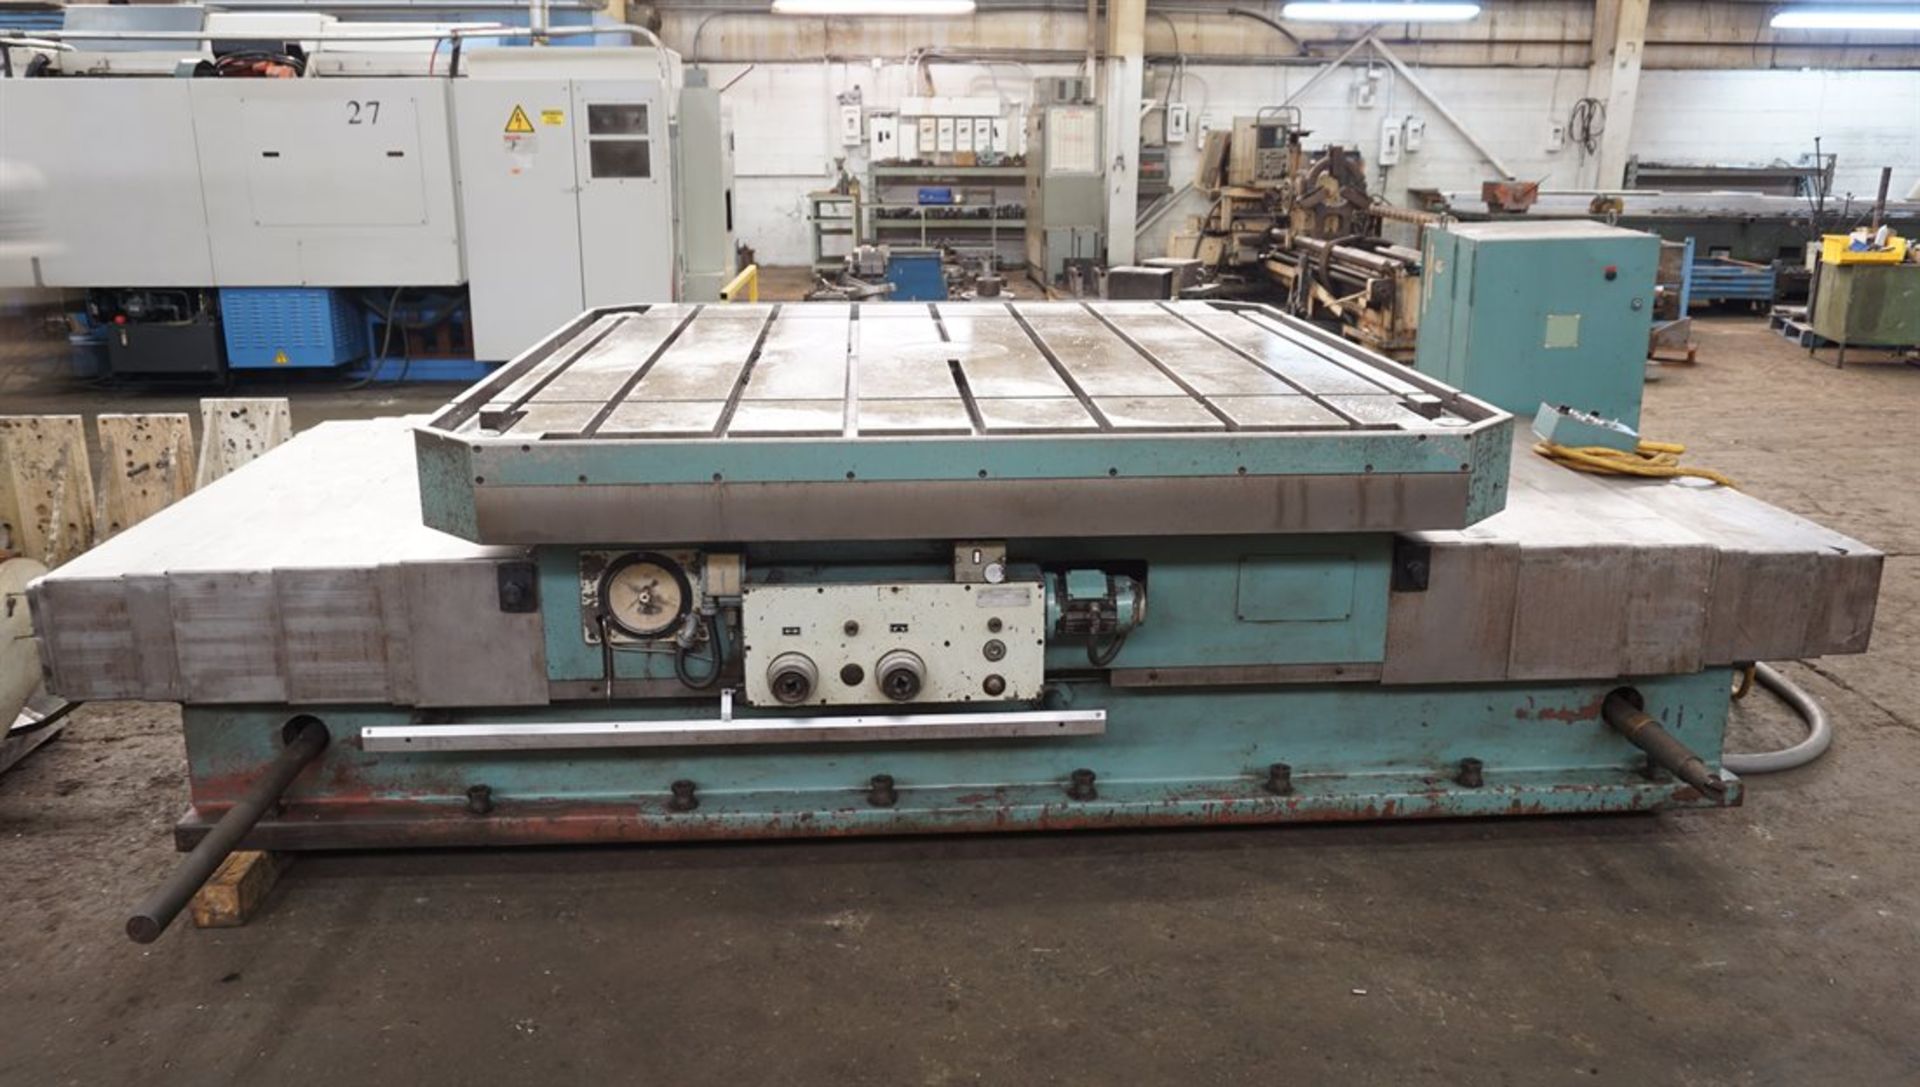 TOS ISO-16 86” X 86” Infeed Rotary Table, s/n 11-03, w/ 60” Infeed, 34,000 lb. Table Load